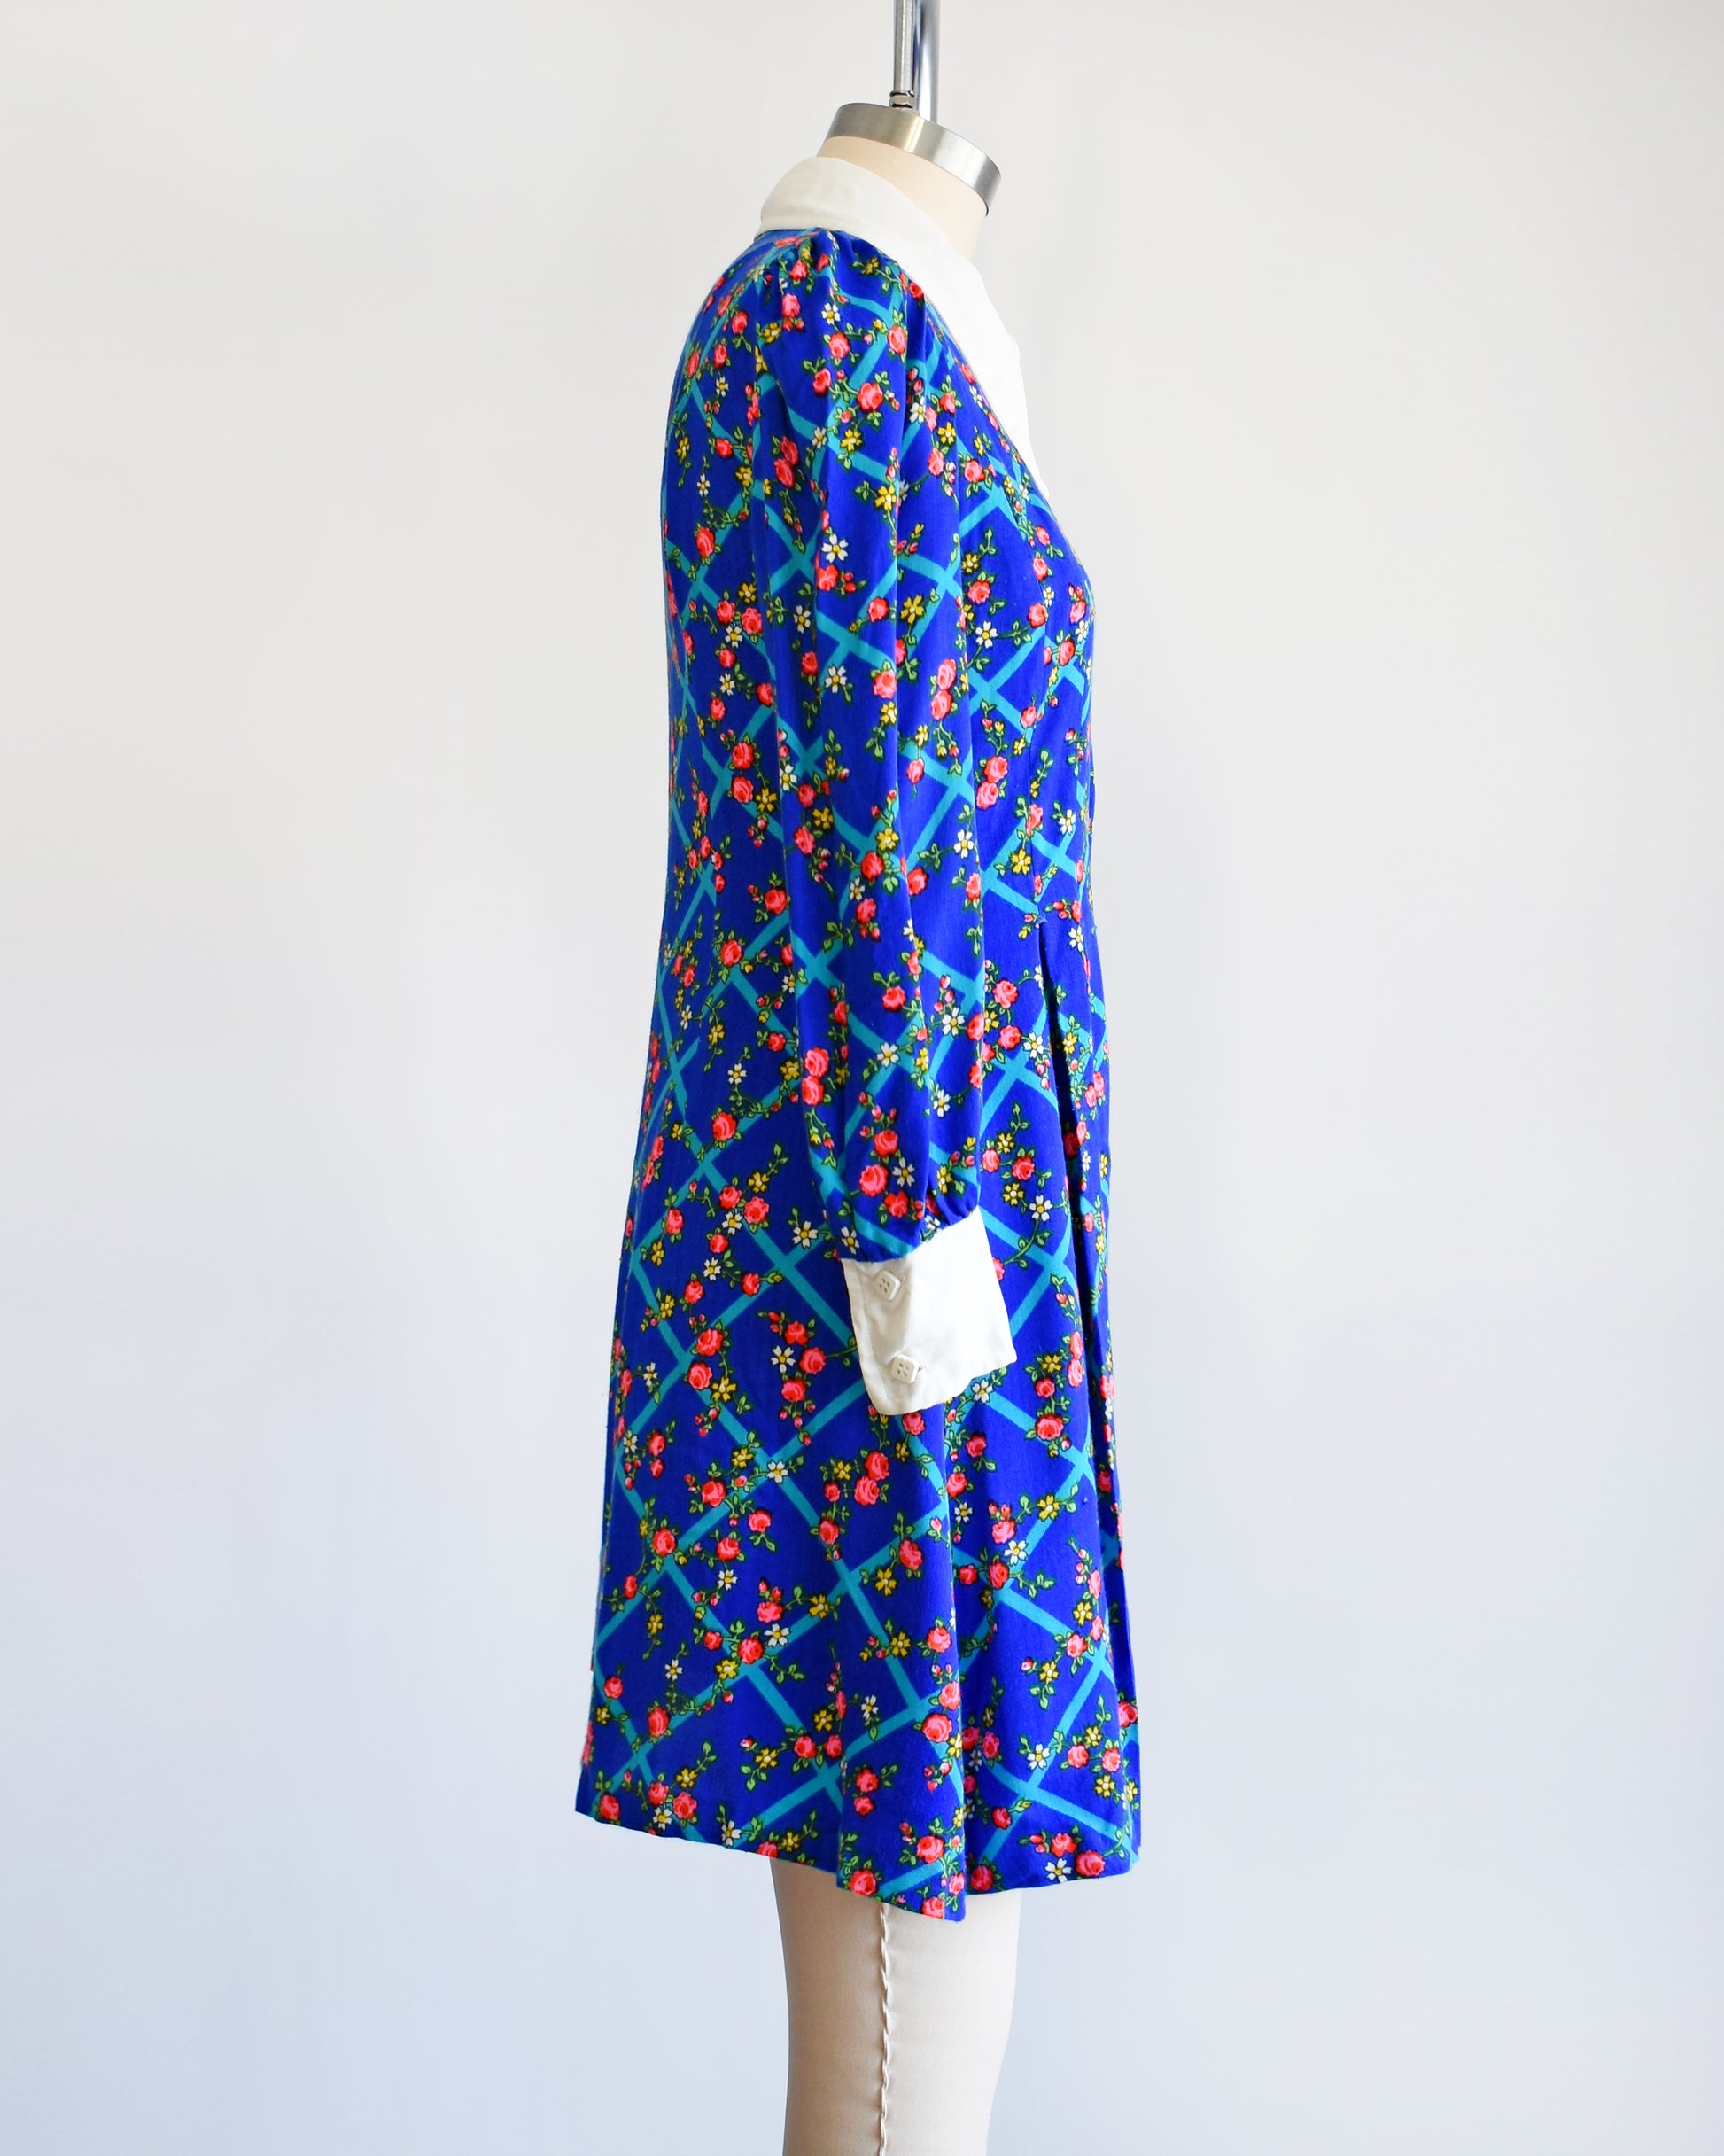 Side view of a vintage 1970s blue floral mini dress that has a white collar with matching cuffs, and white buttons down the front.